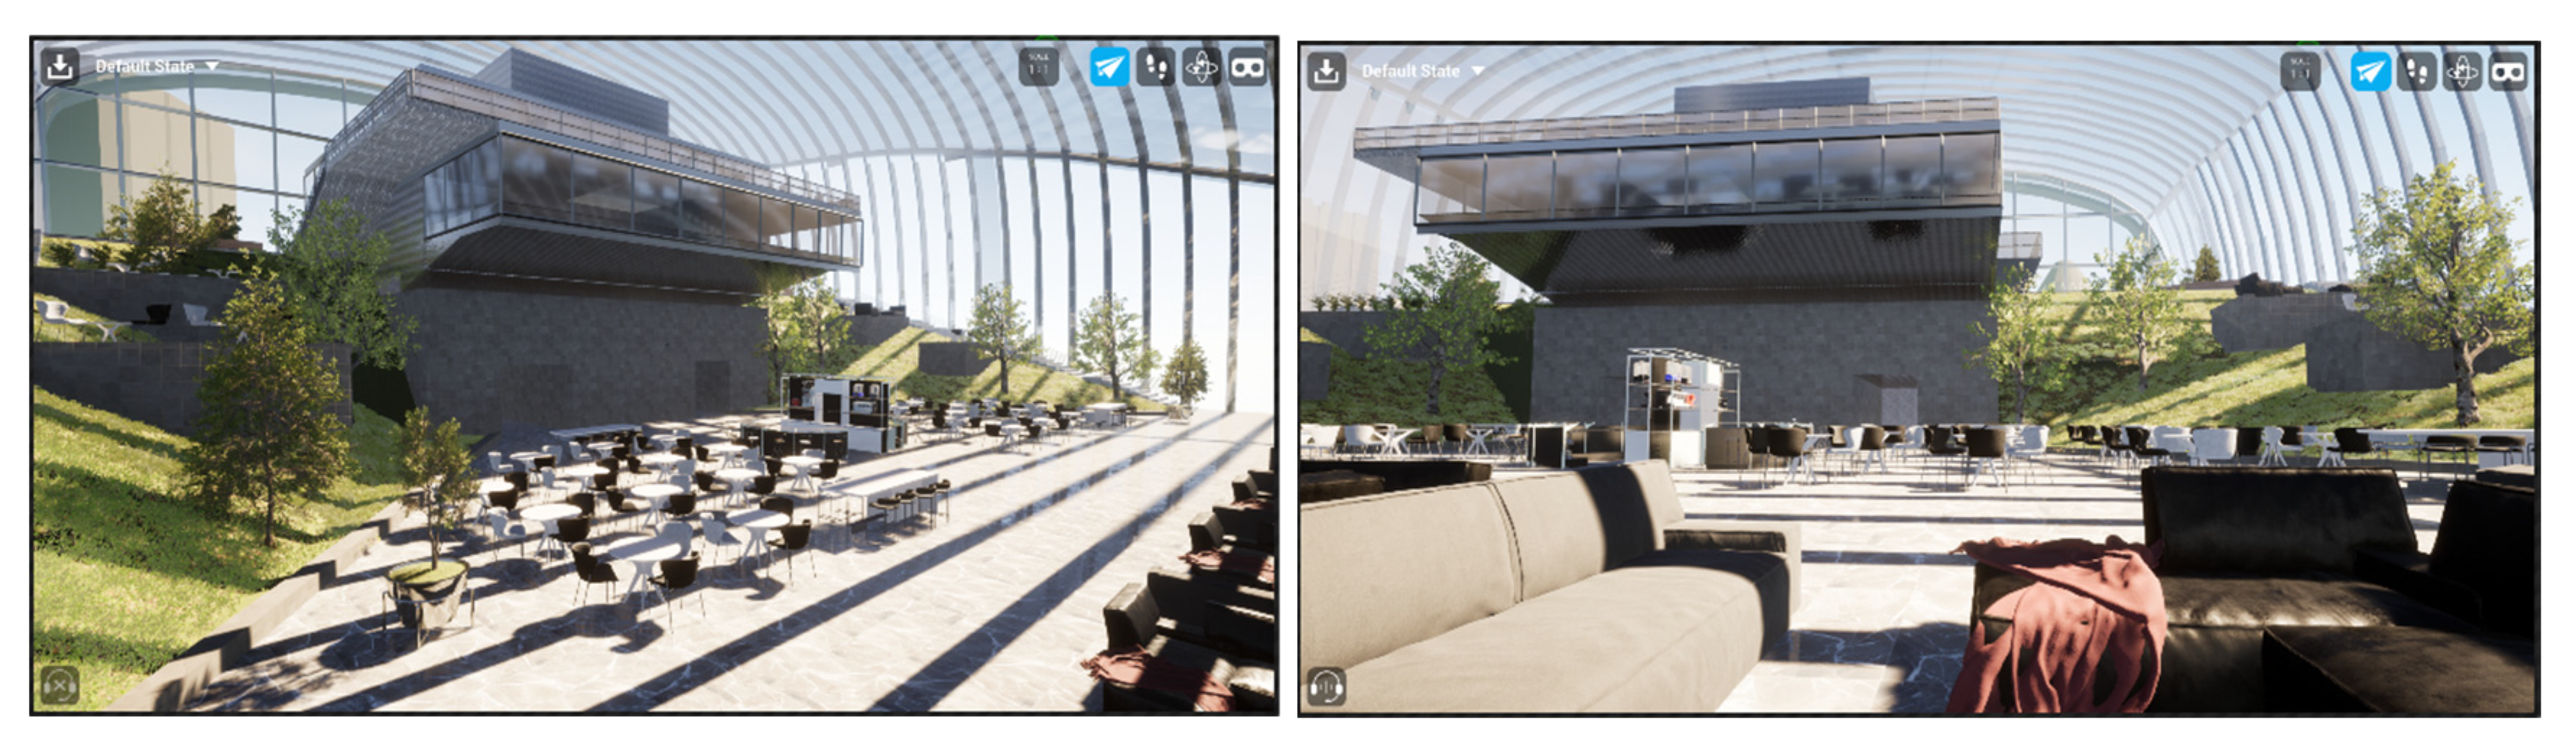 Buildings | Free Full-Text | Enhancing Public Engagement in Architectural  Design: A Comparative Analysis of Advanced Virtual Reality Approaches in  Building Information Modeling and Gamification Techniques